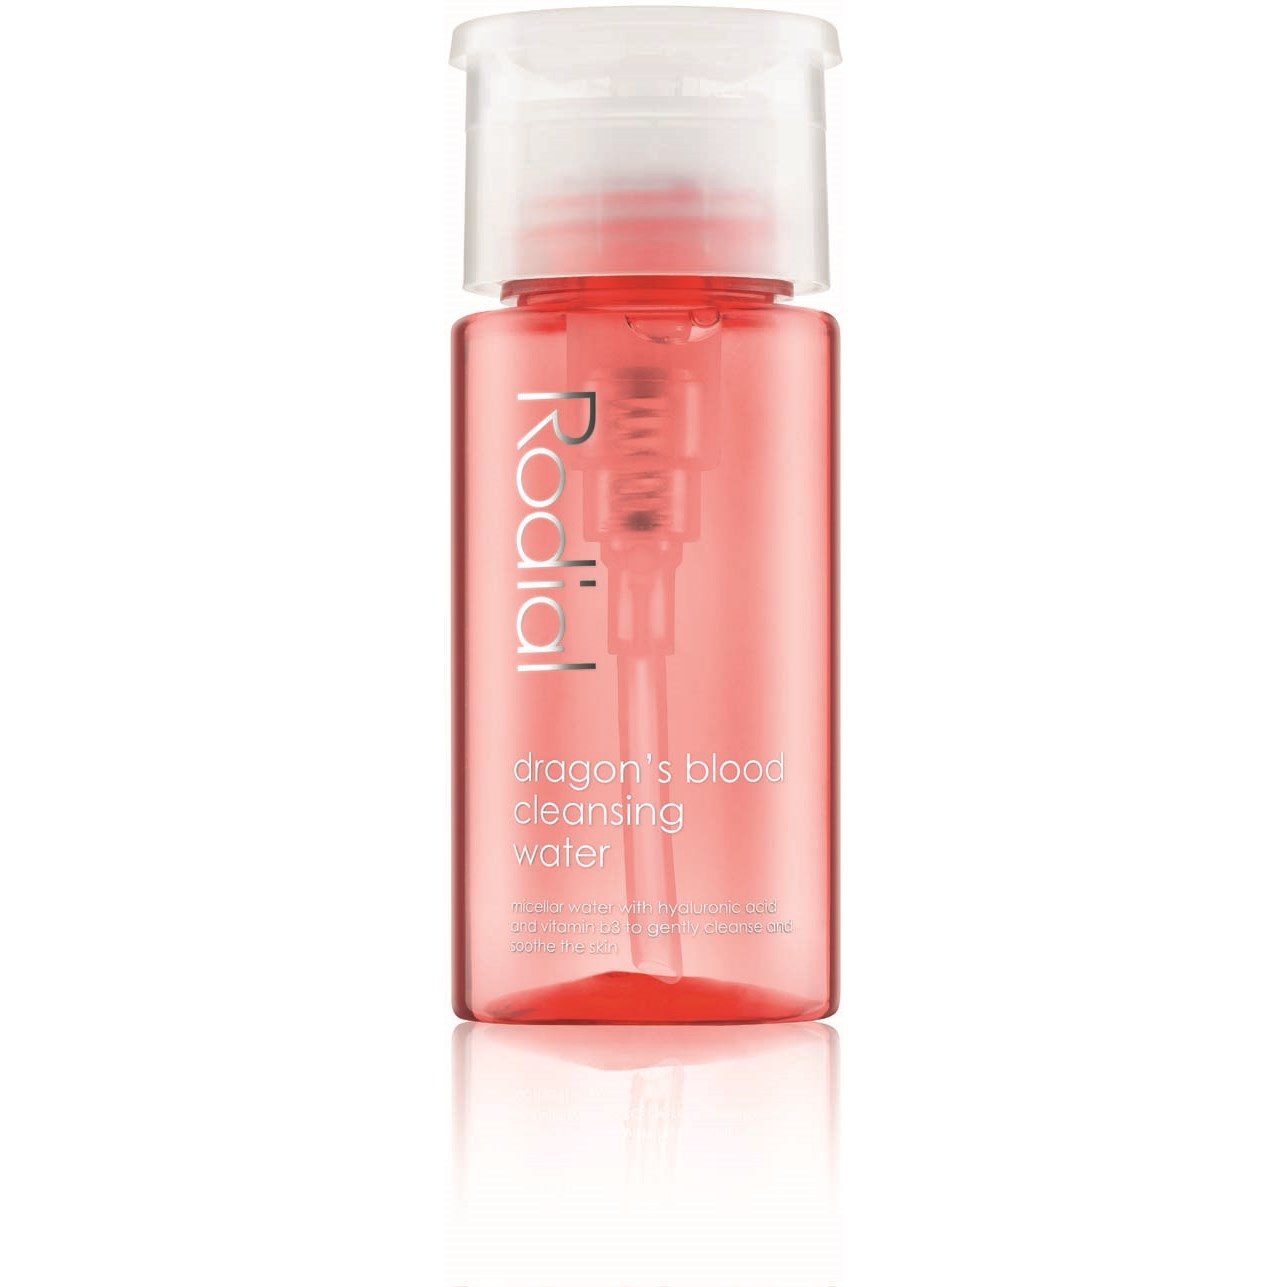 Rodial Dragons Blood Cleansing Water Deluxe 100 ml